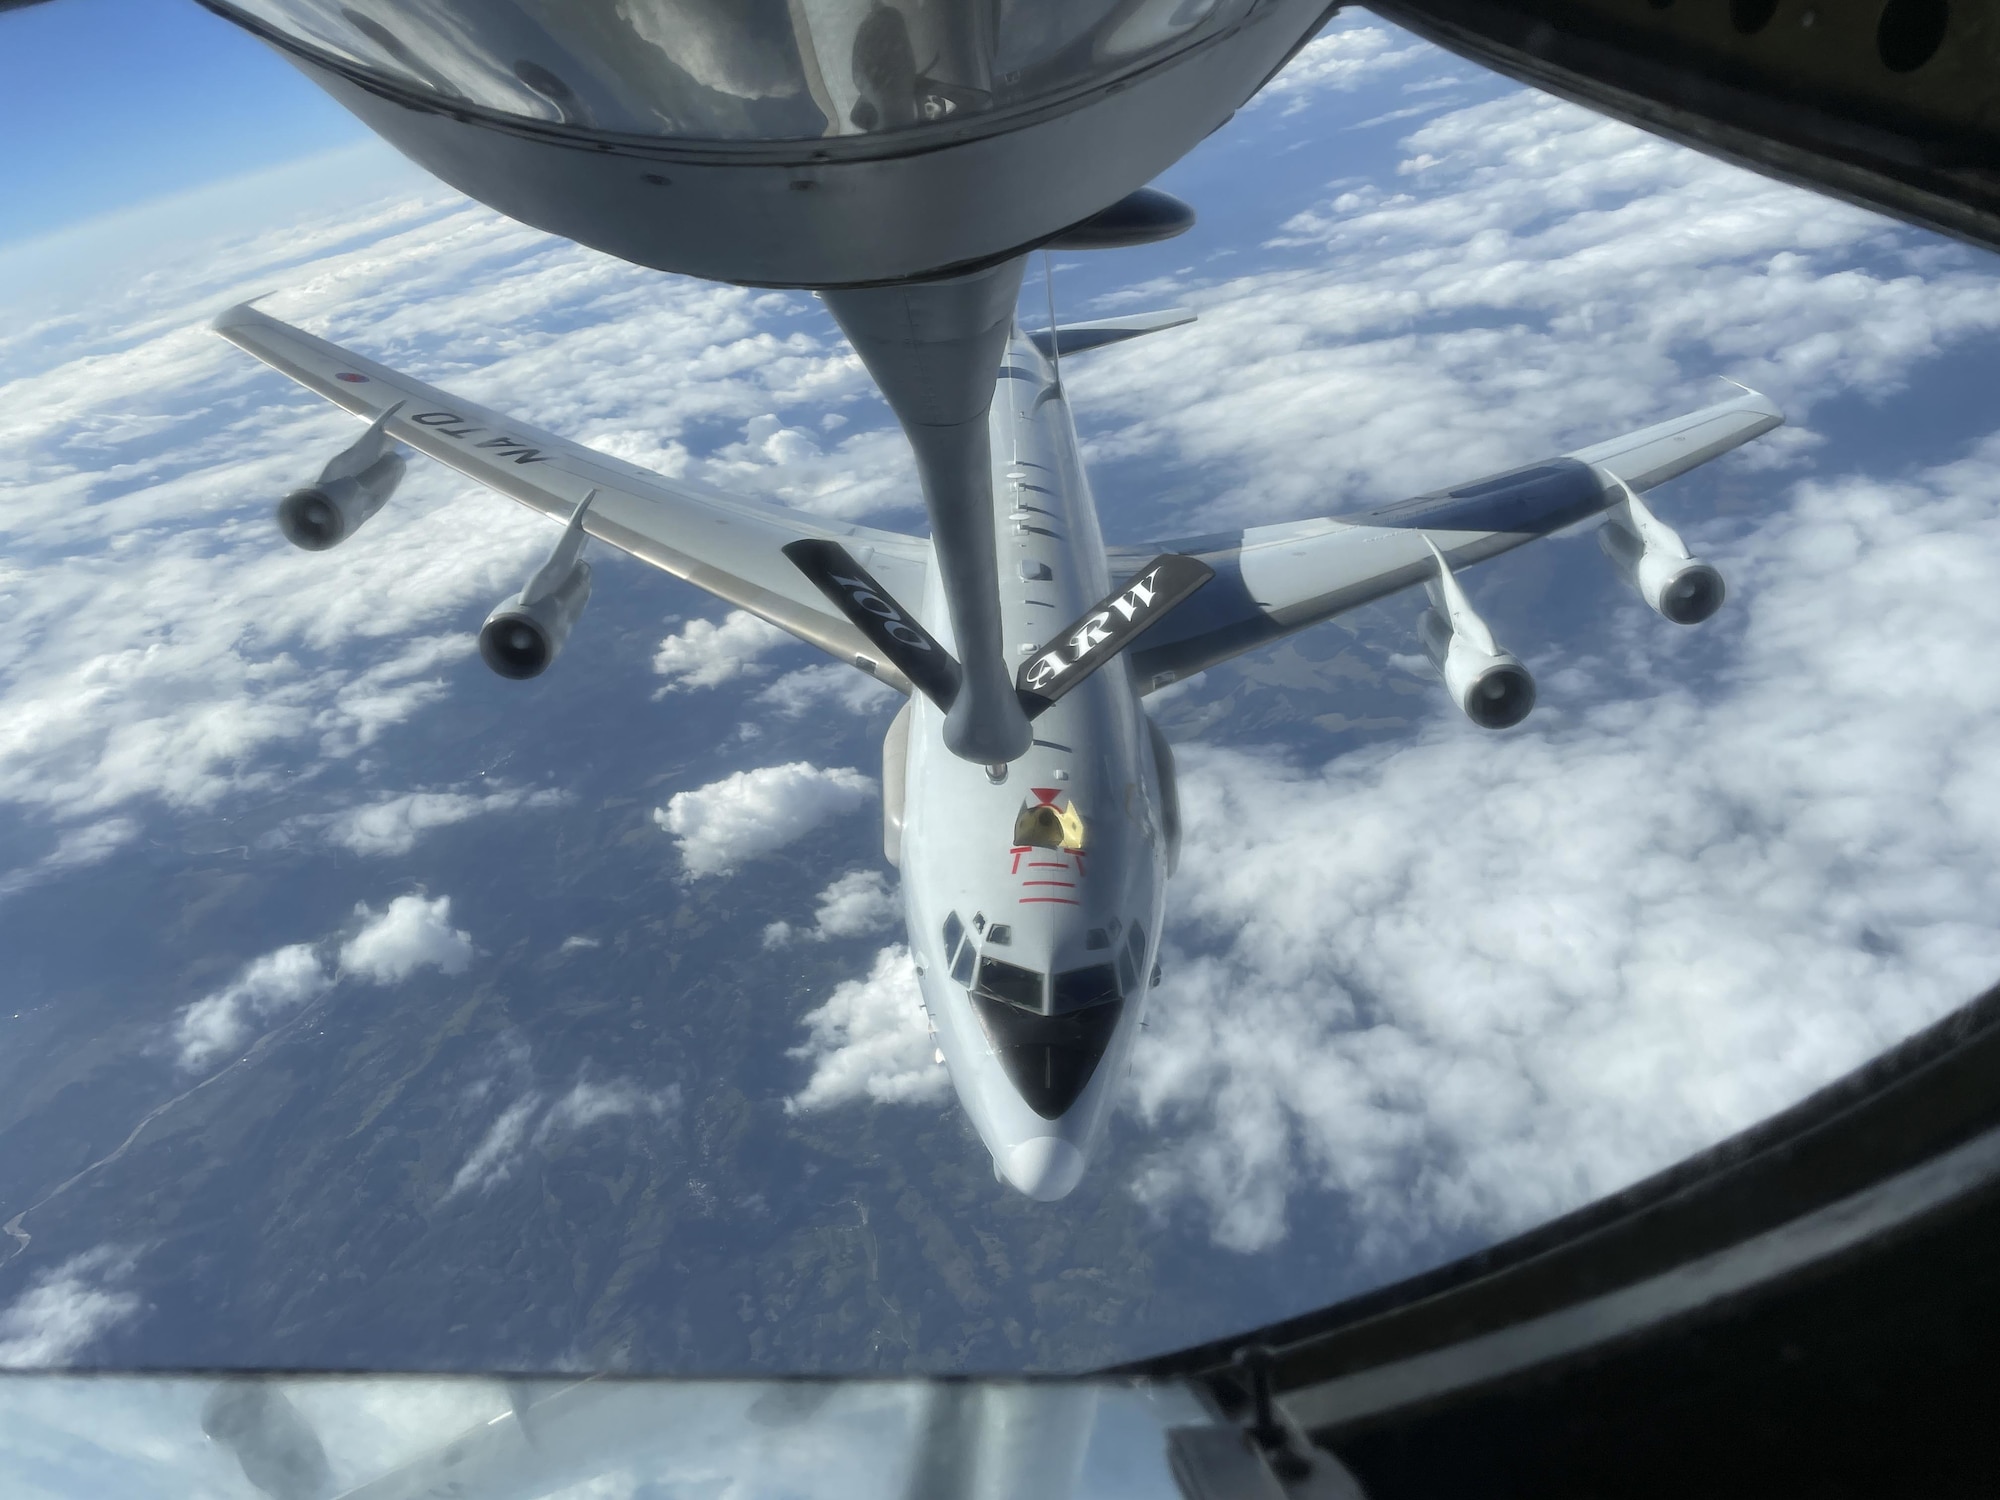 A NATO E-3 Sentry aircraft assigned to Geilenkirchen NATO Air Base, Germany, departs after receiving fuel from a U.S. Air Force KC-135 Stratotanker aircraft assigned to the 100th Air Refueling Wing, Royal Air Force Mildenhall, England, over Europe, Aug. 19, 2021. The KC-135 extends the range of fighter, bomber, transport, intelligence, reconnaissance and surveillance aircraft. (U.S. Air Force photo by Senior Airman Joseph Barron)